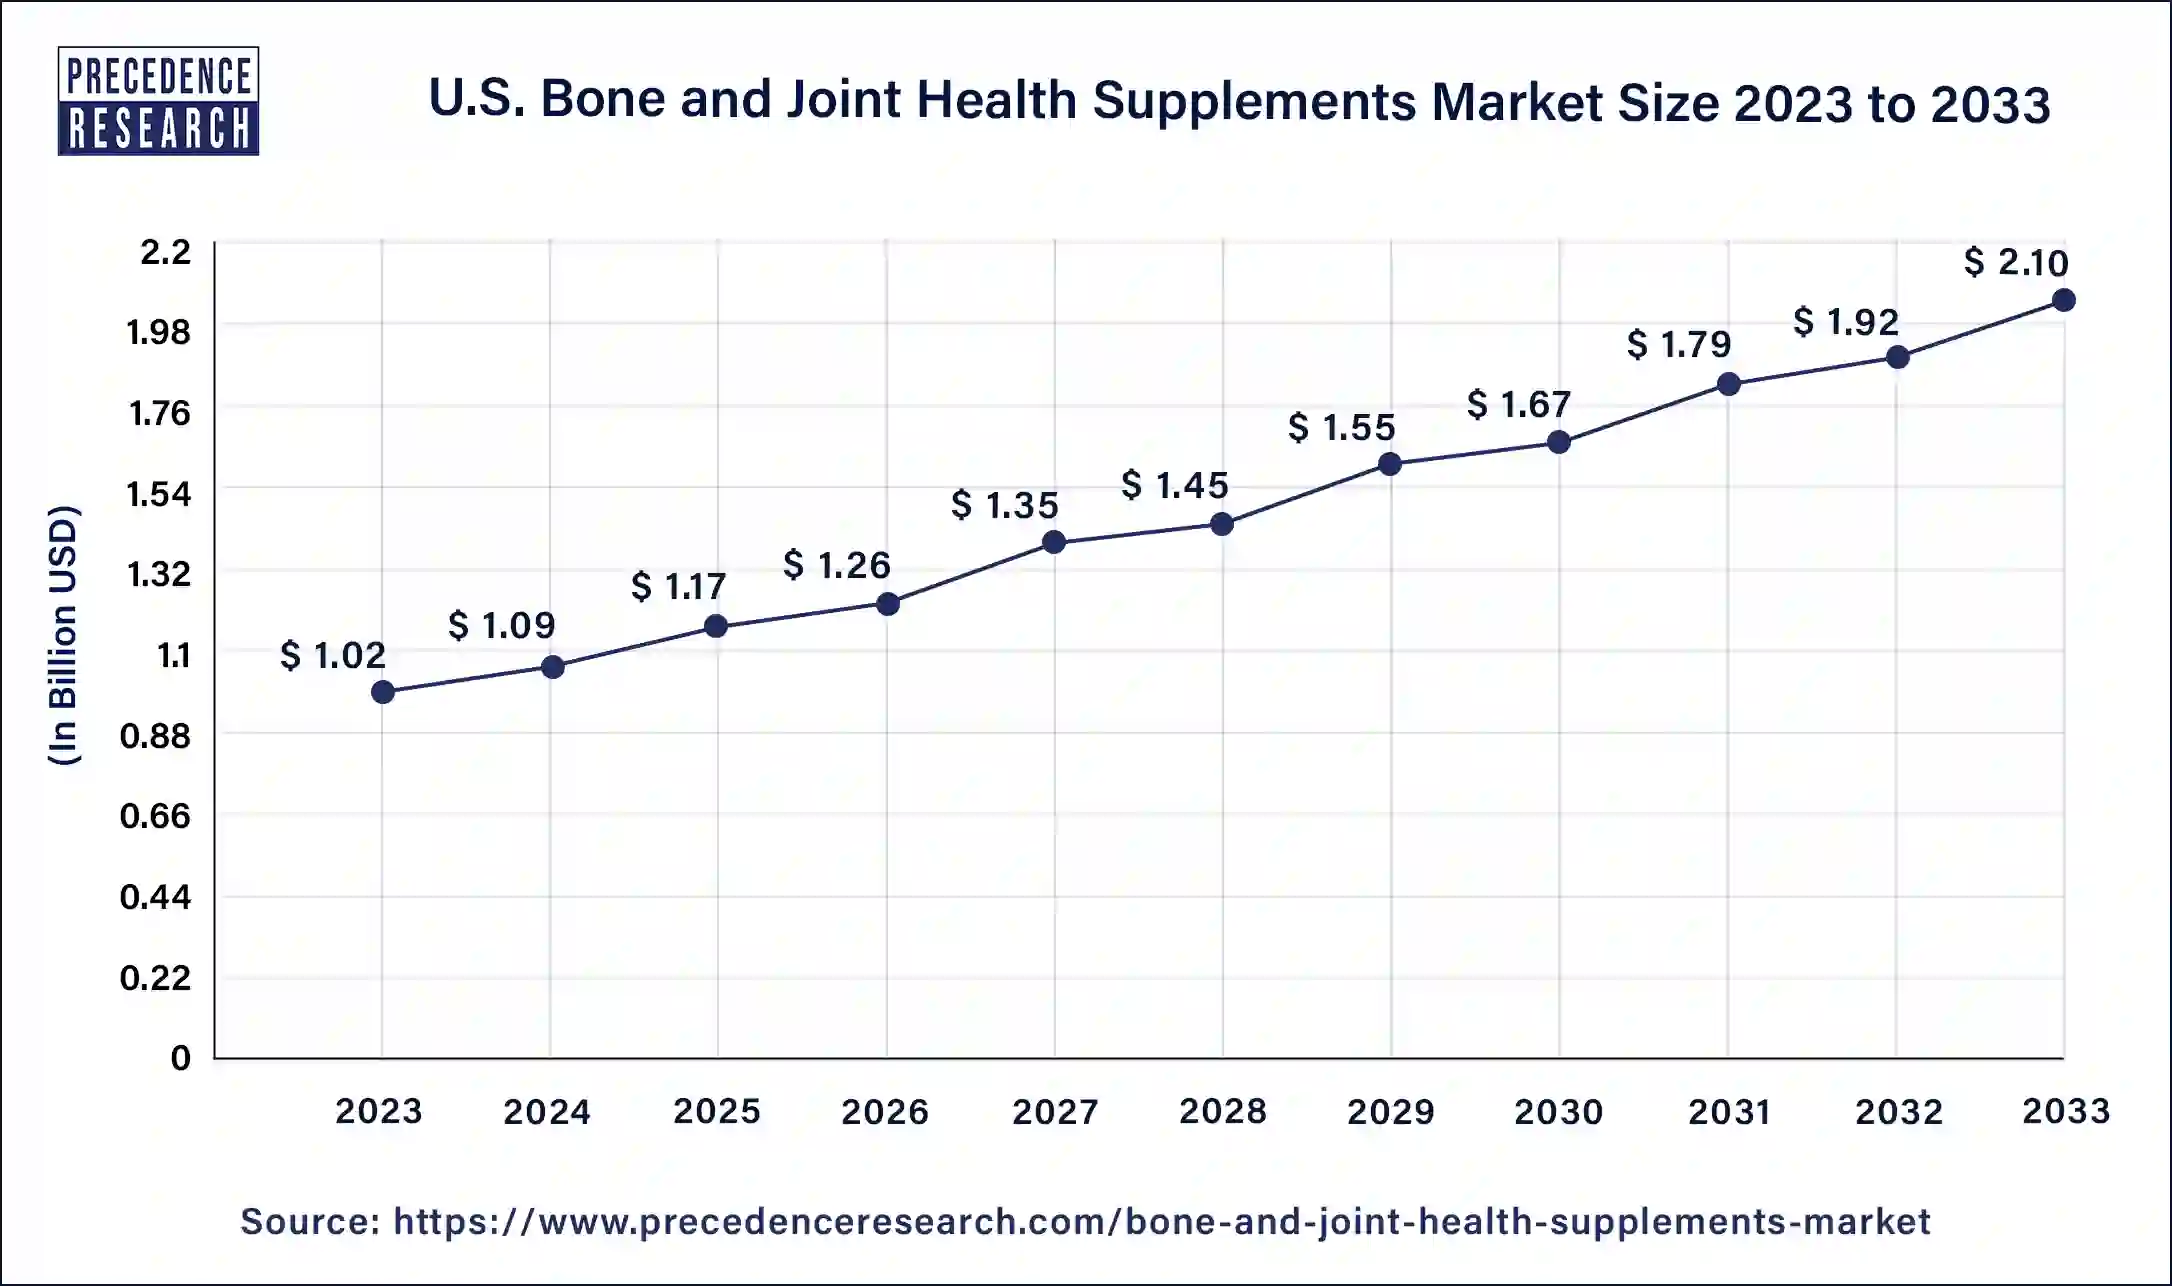 U.S. Bone and Joint Health Supplements Market Size 2024 to 2033